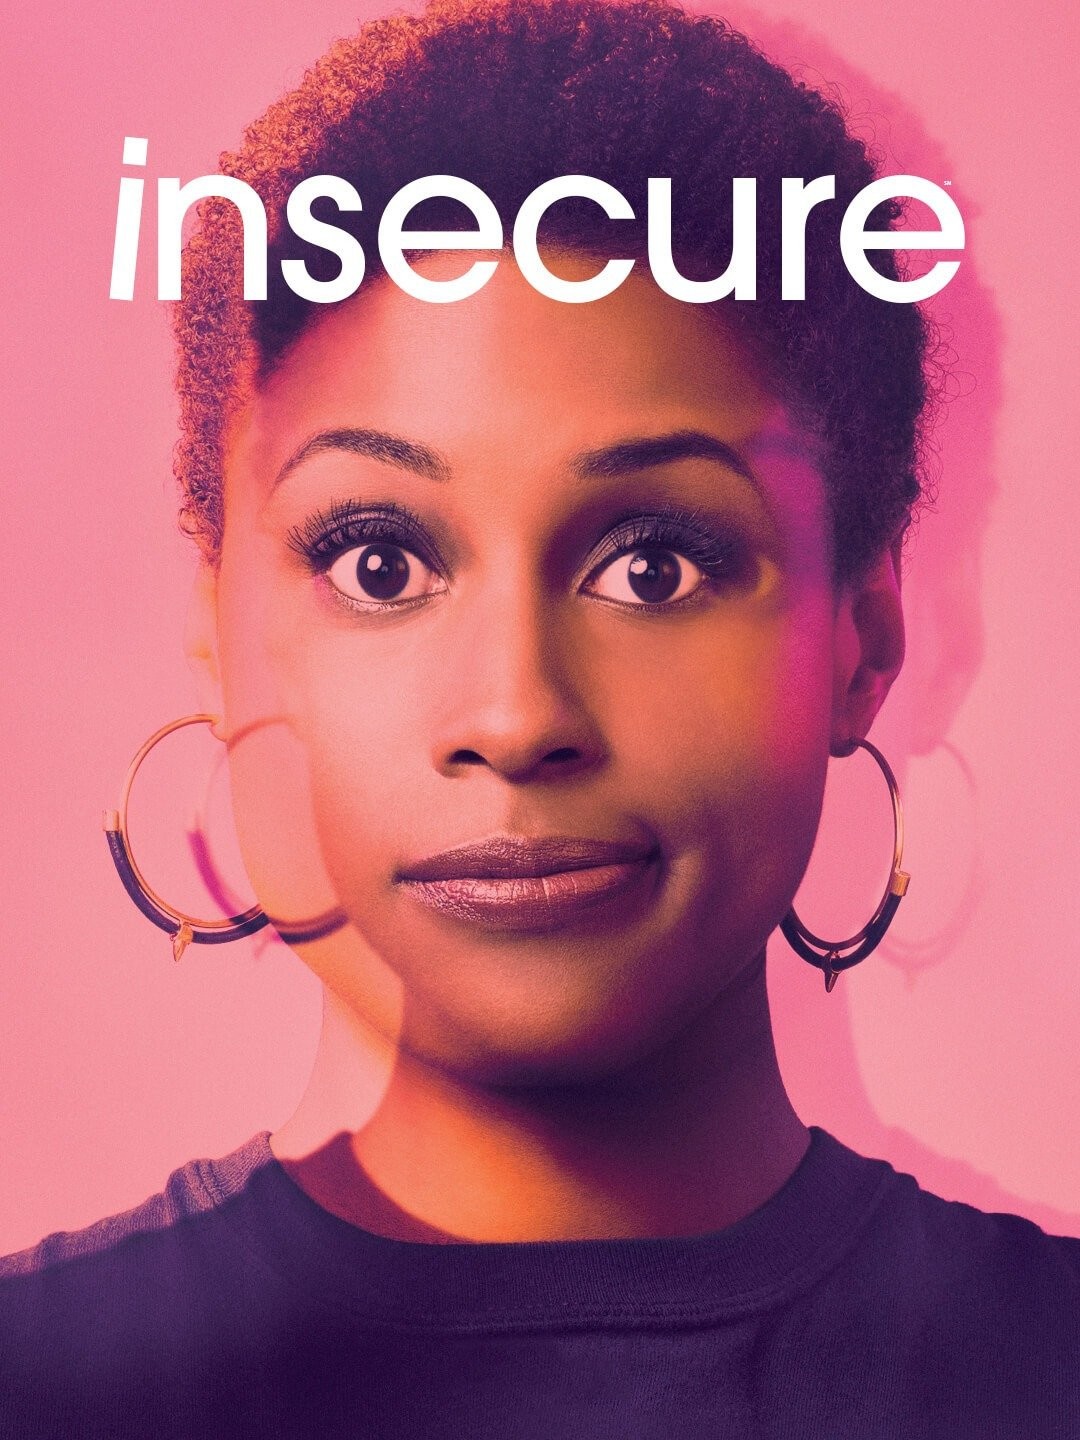 Insecure' Now Streaming on Netflix, With More HBO Shows on the Way